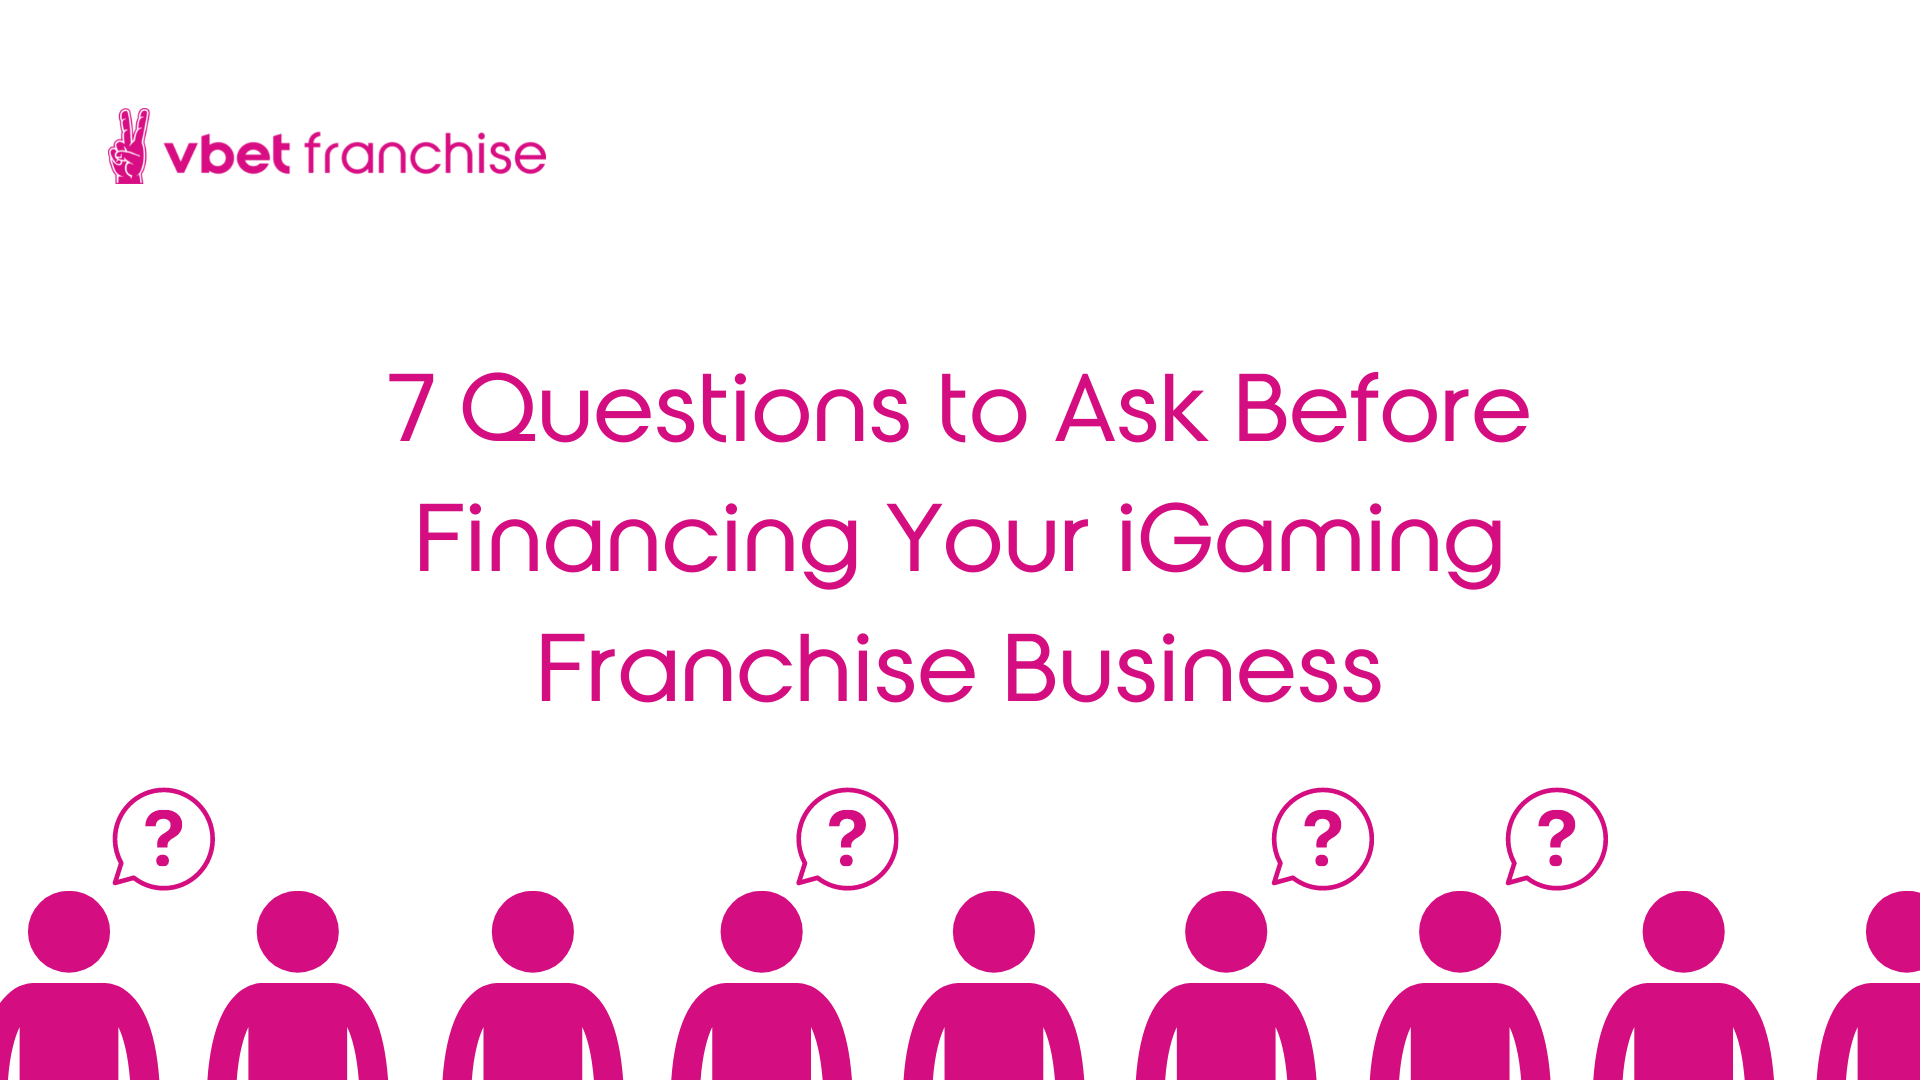 7 Questions to Ask Before Financing Your iGaming Franchise Business